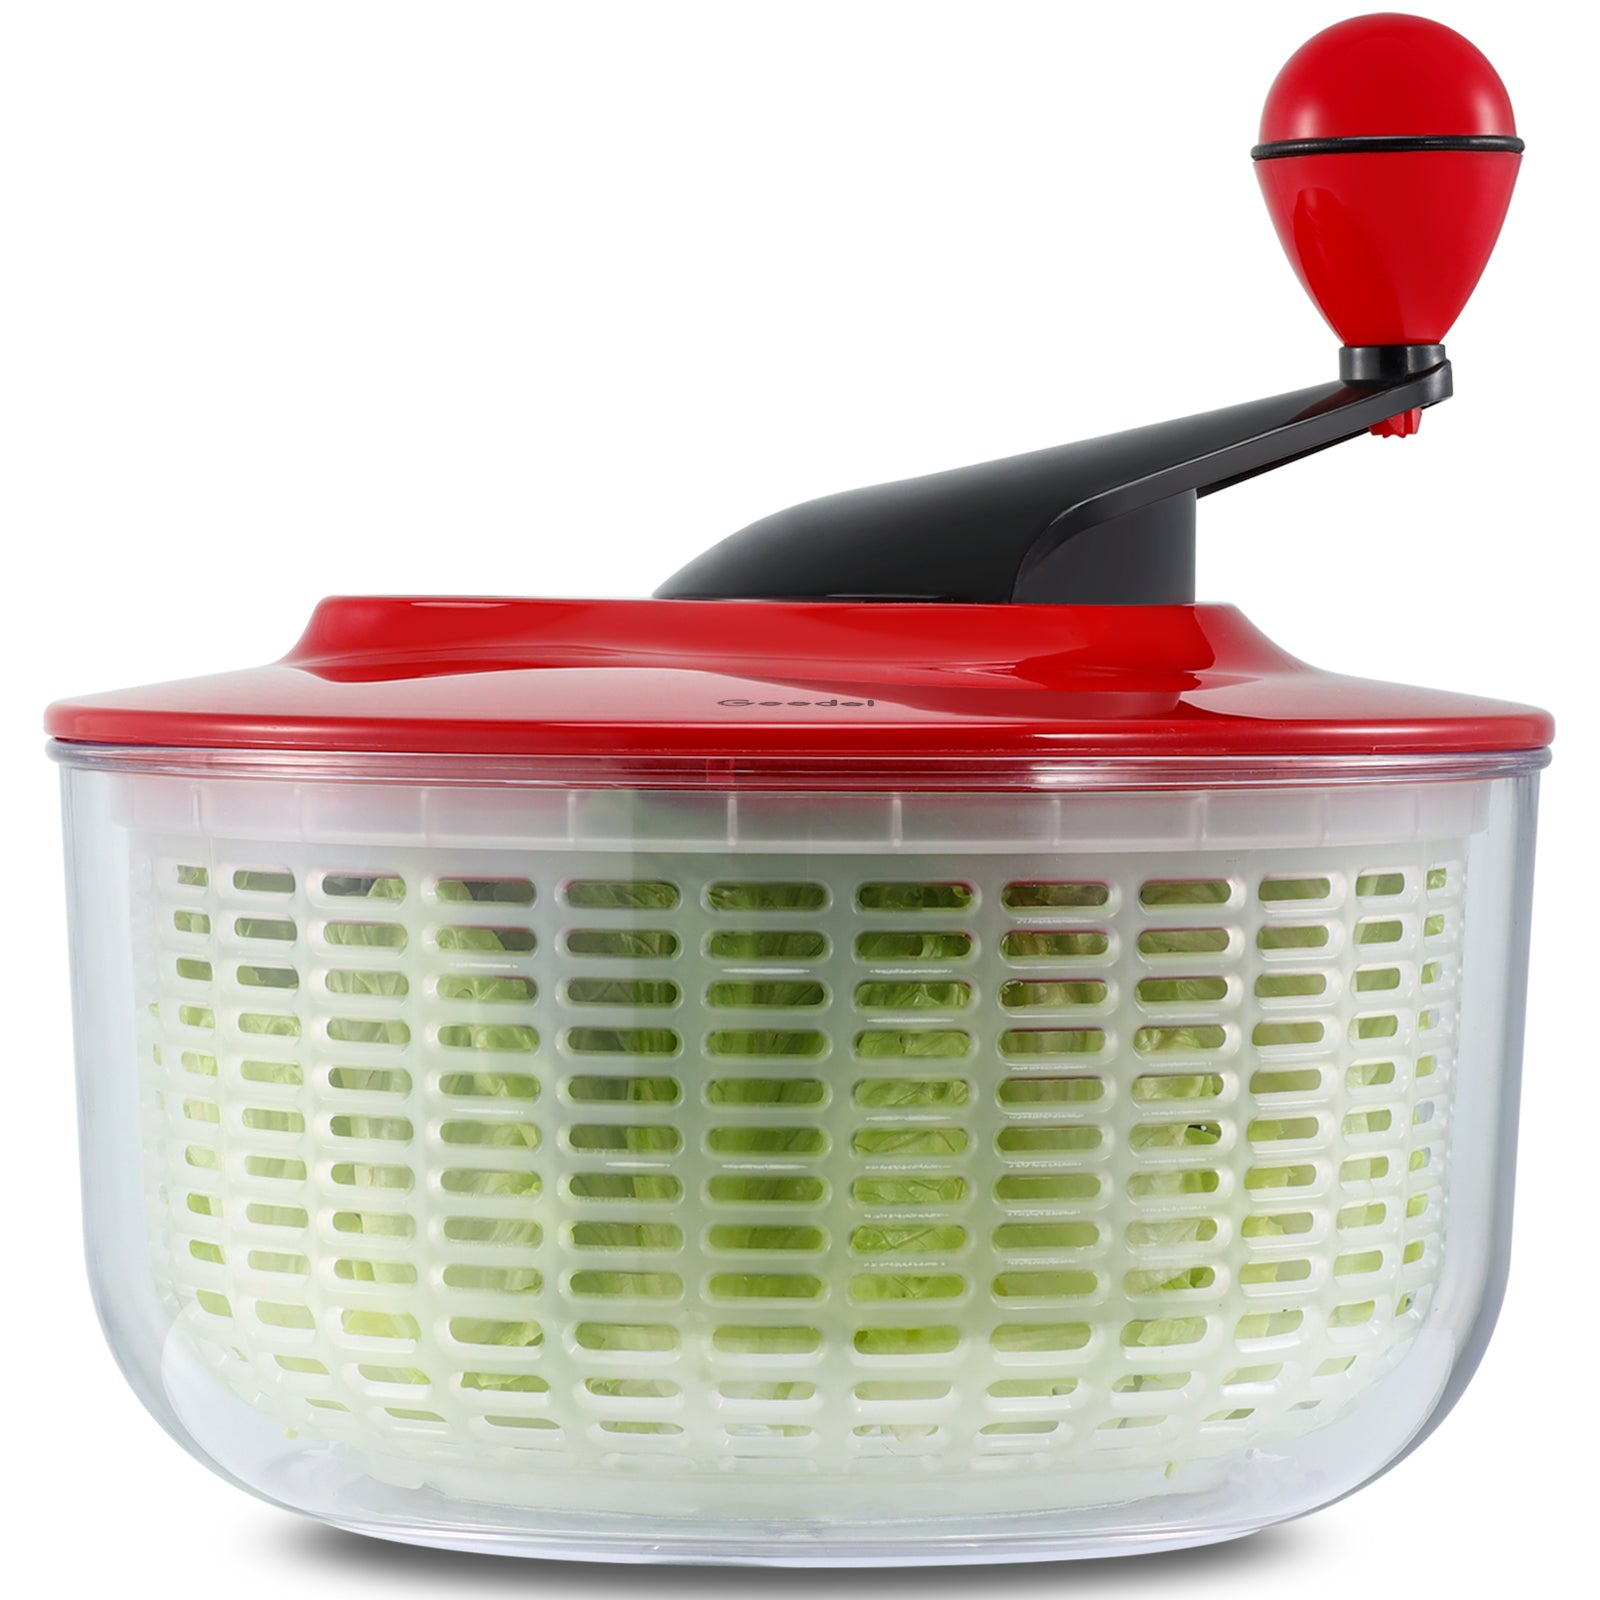 How to Use a Salad Spinner Plus How to Clean One